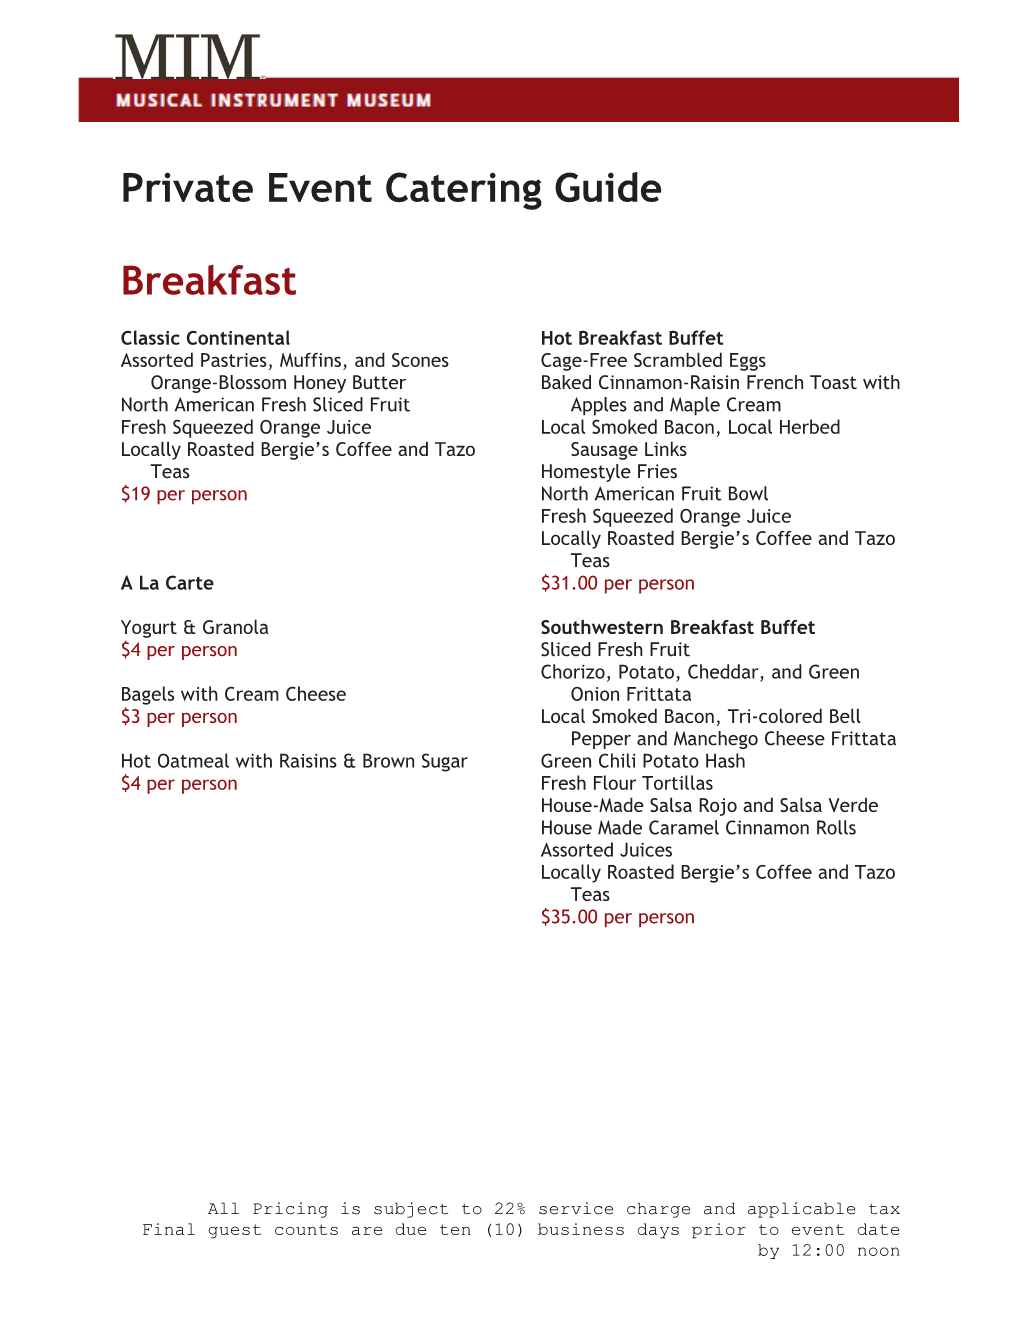 Private Event Catering Guide Breakfast